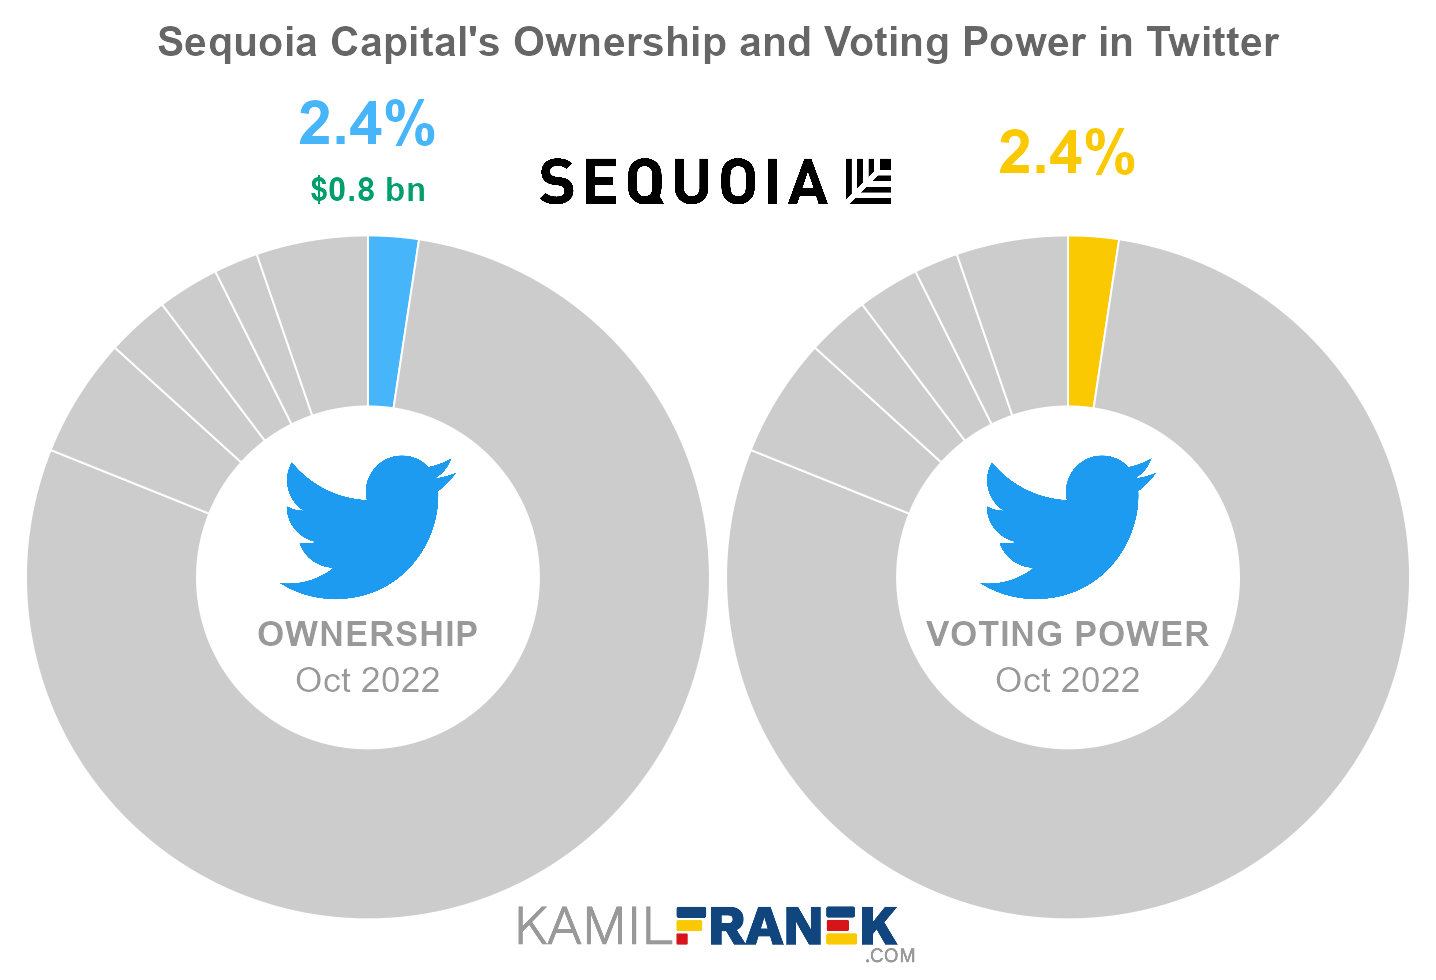 Sequoia Capital's share ownership and voting power in Twitter (chart)